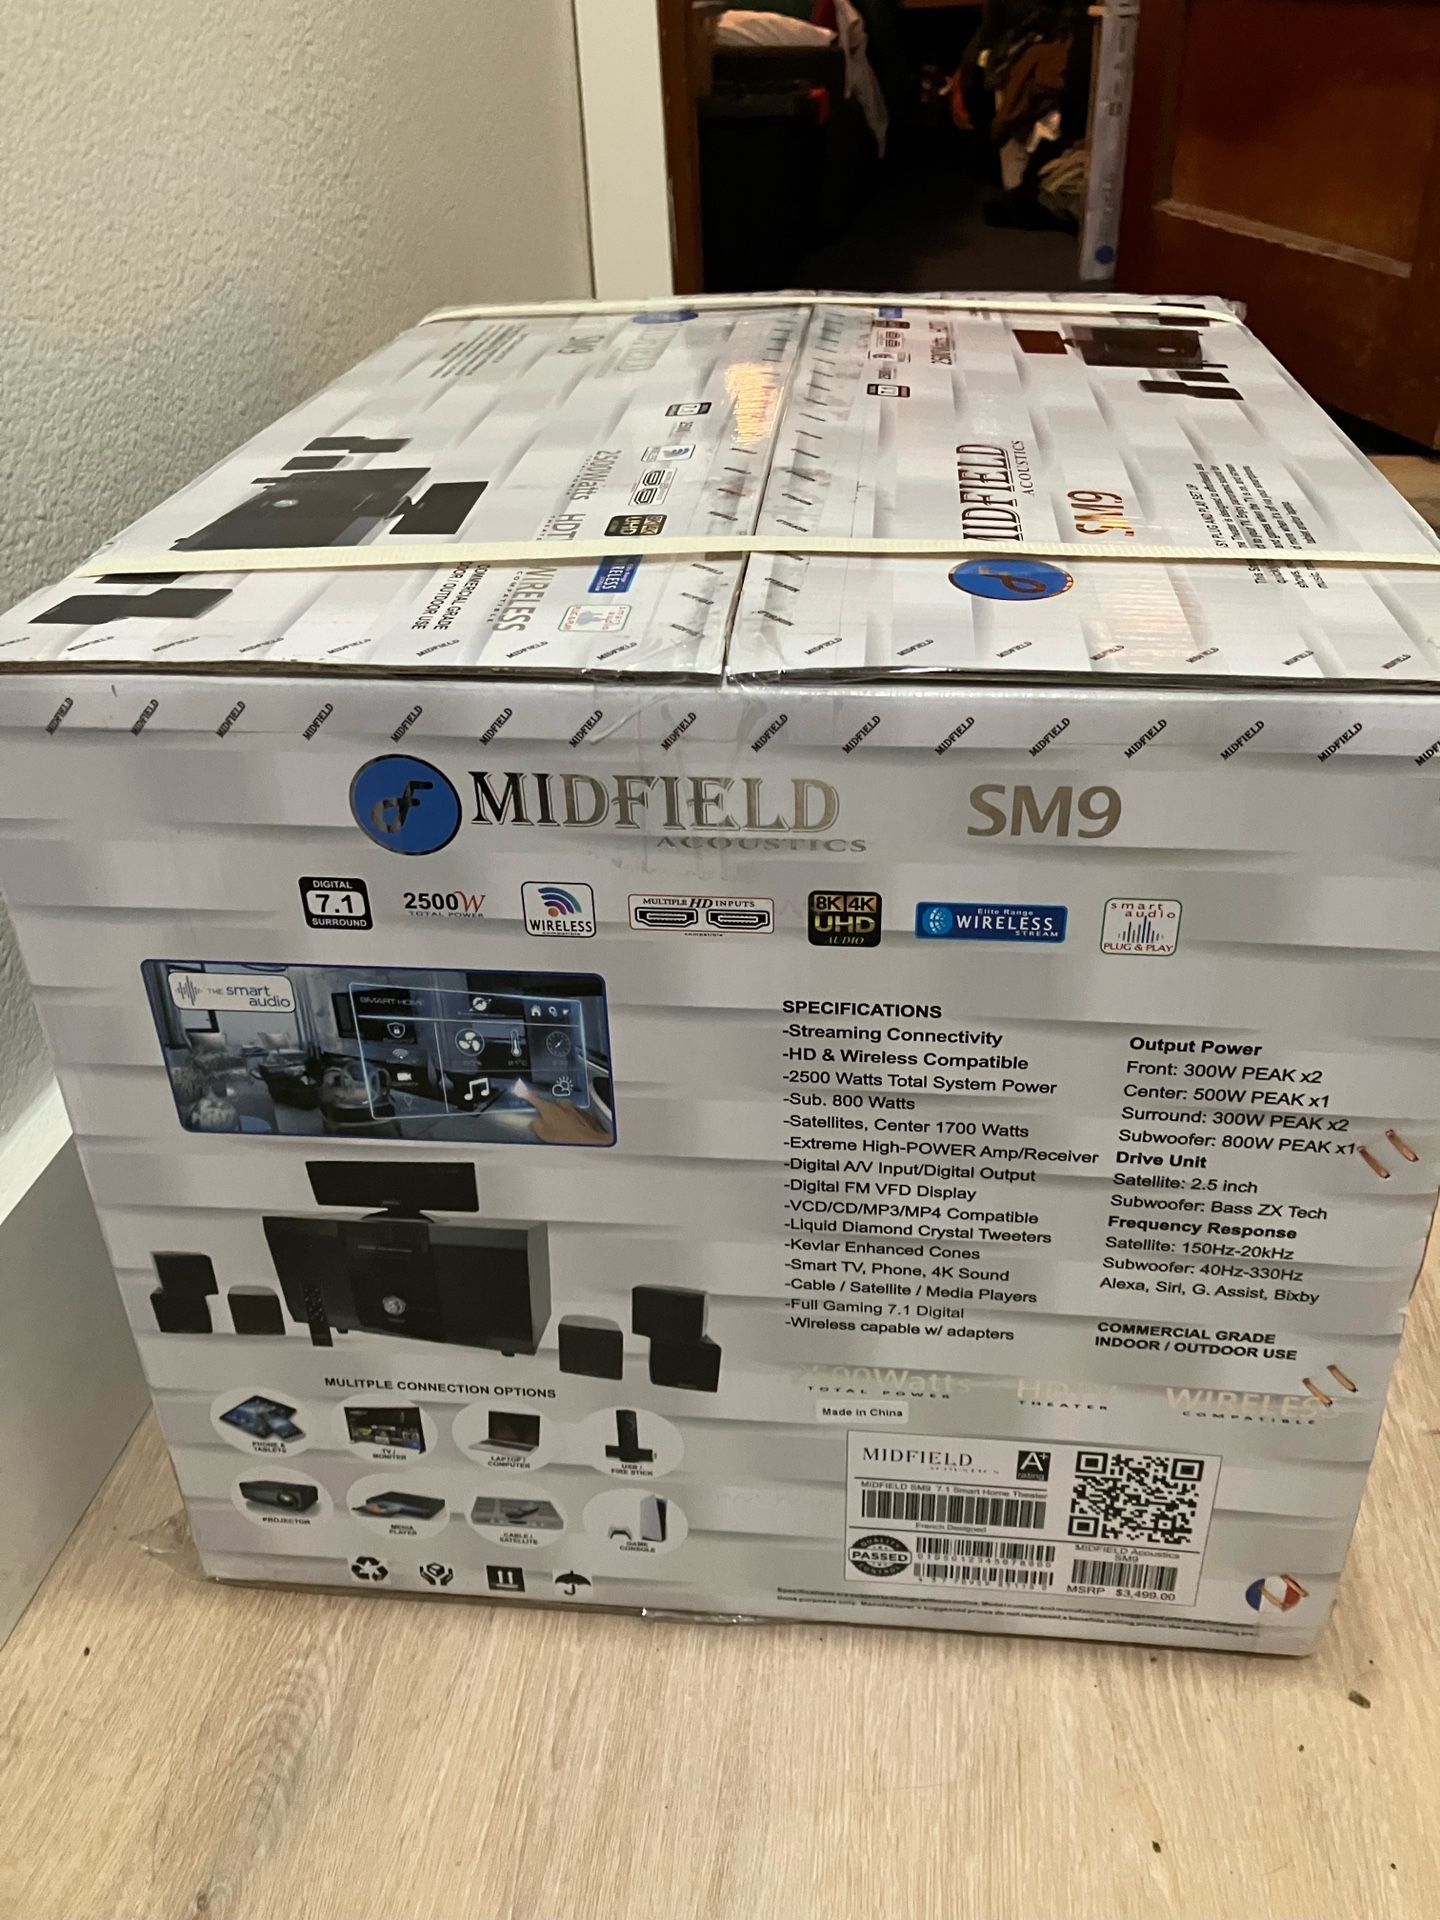 Midfield SM9 Home Theater System